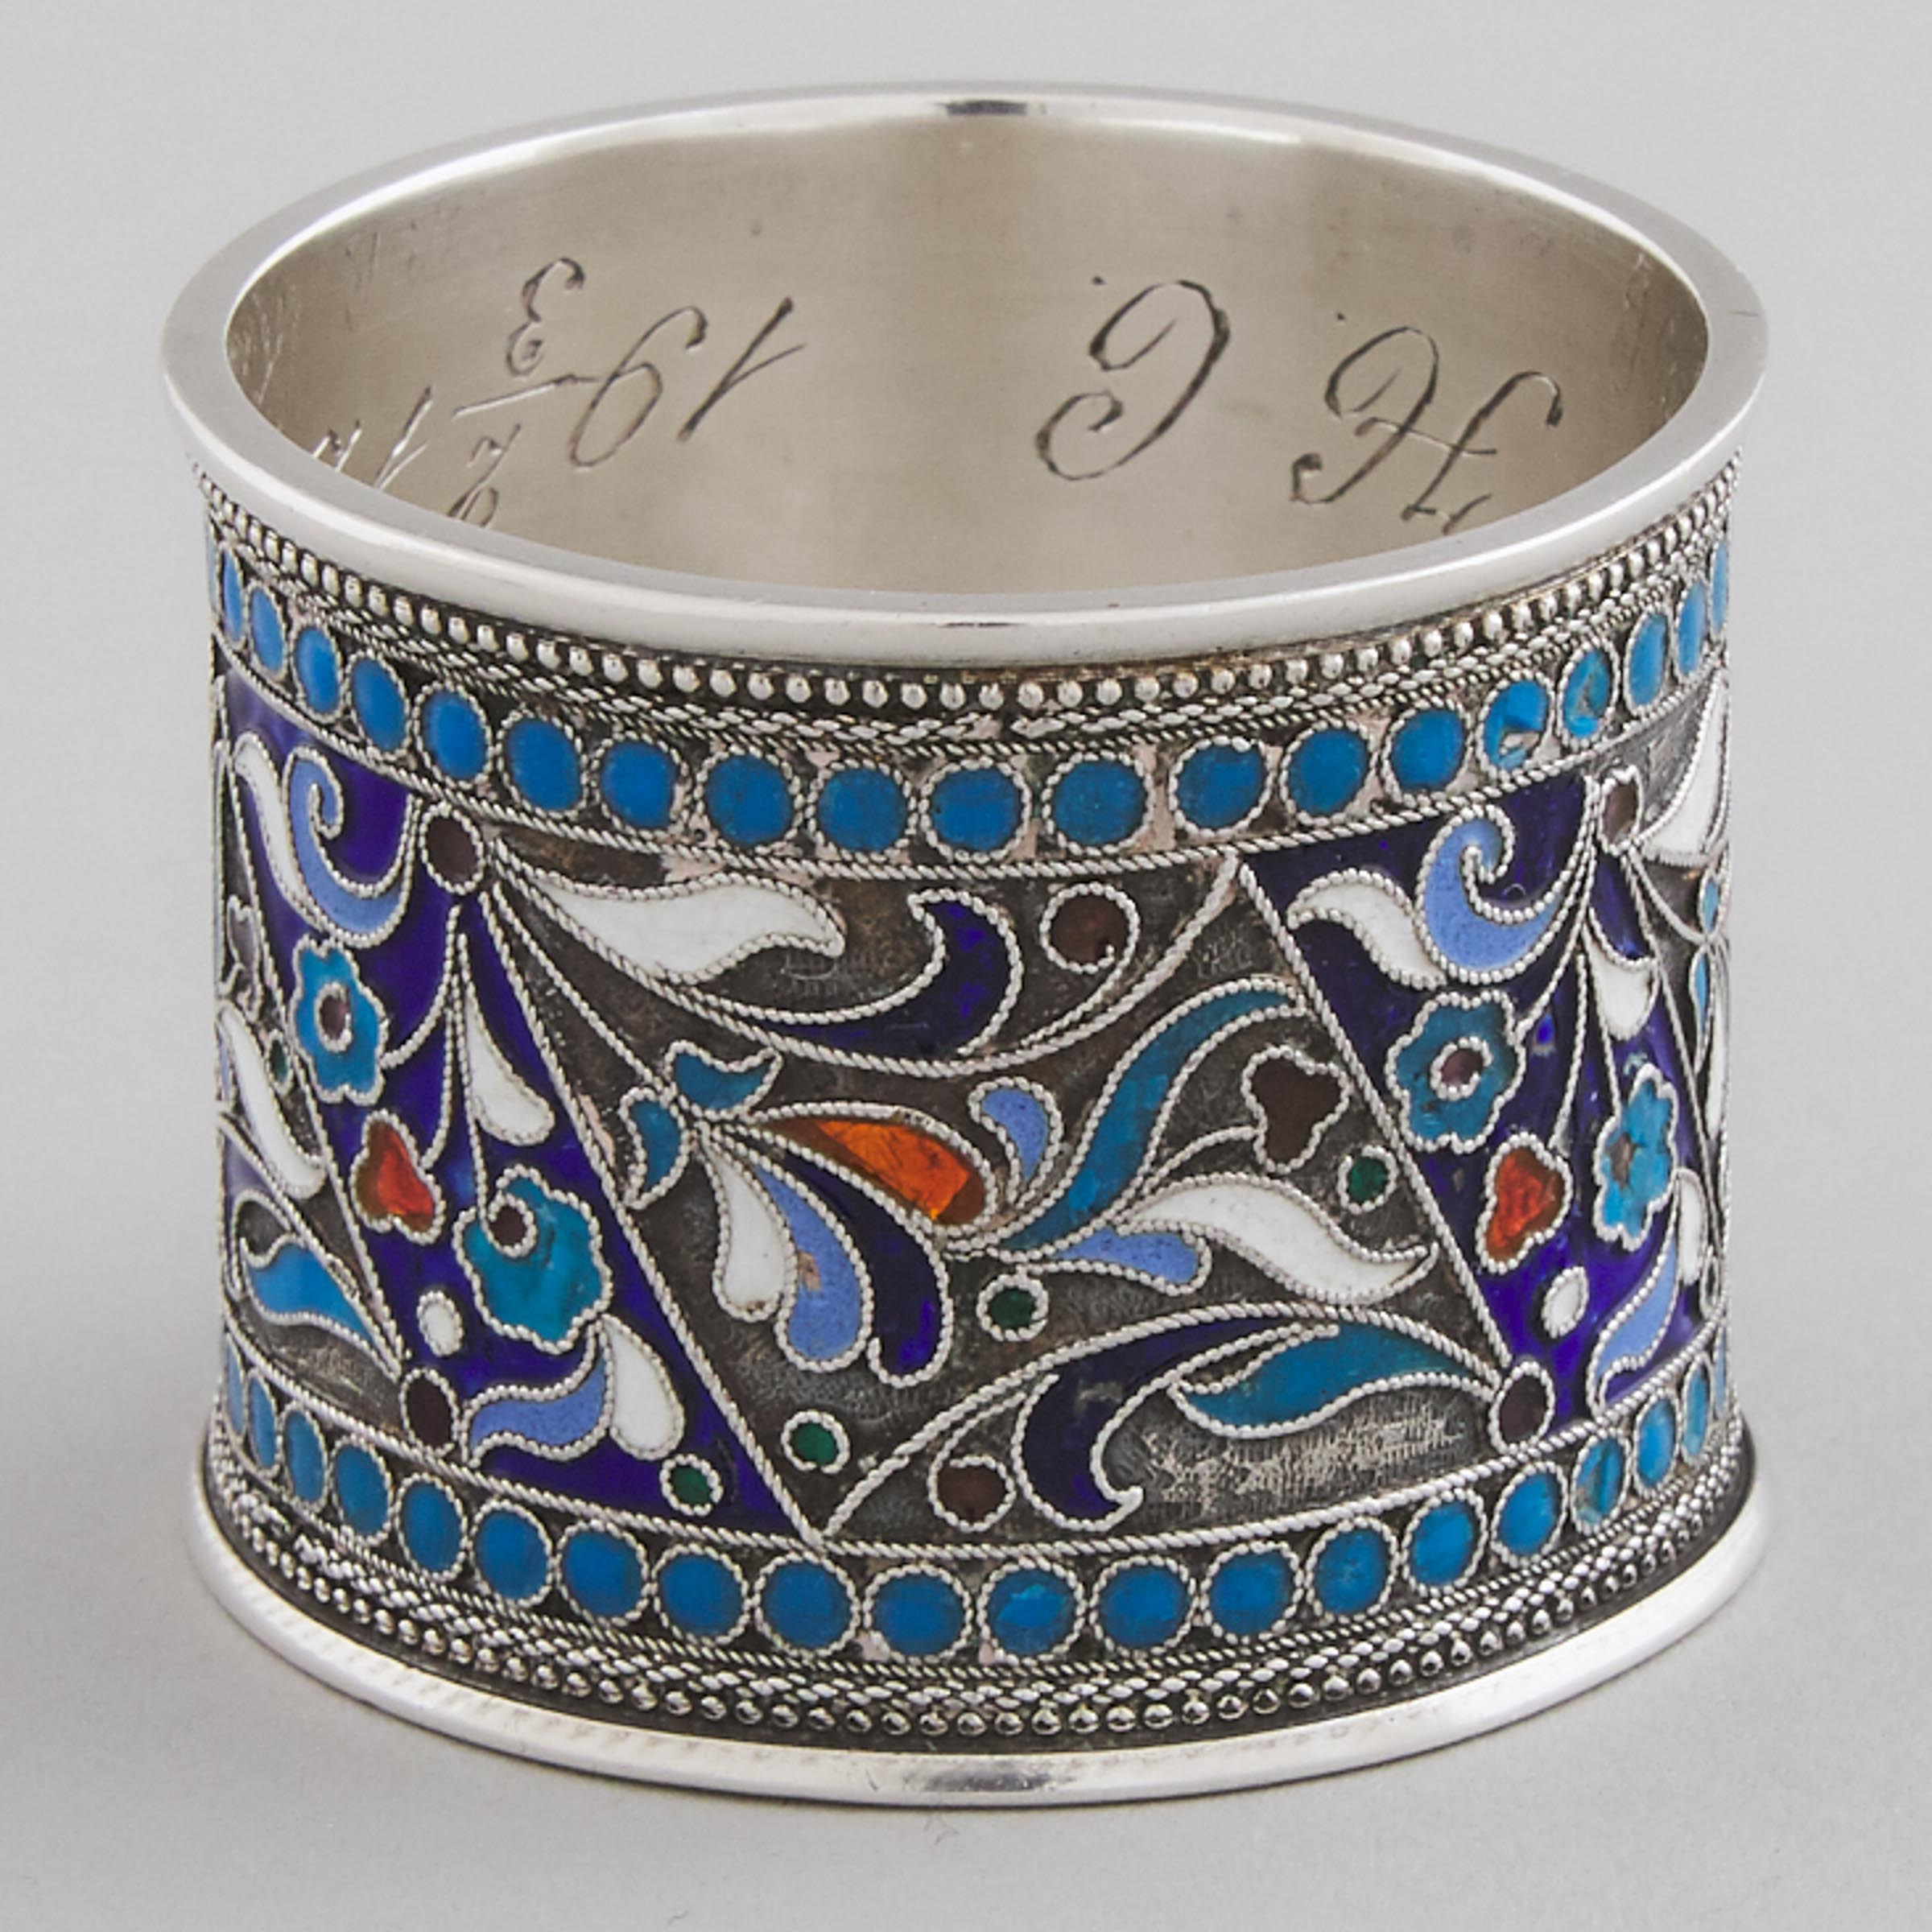 Russian Cloisonné Enameled Silver Napkin Ring, Moscow, c.1899-1908